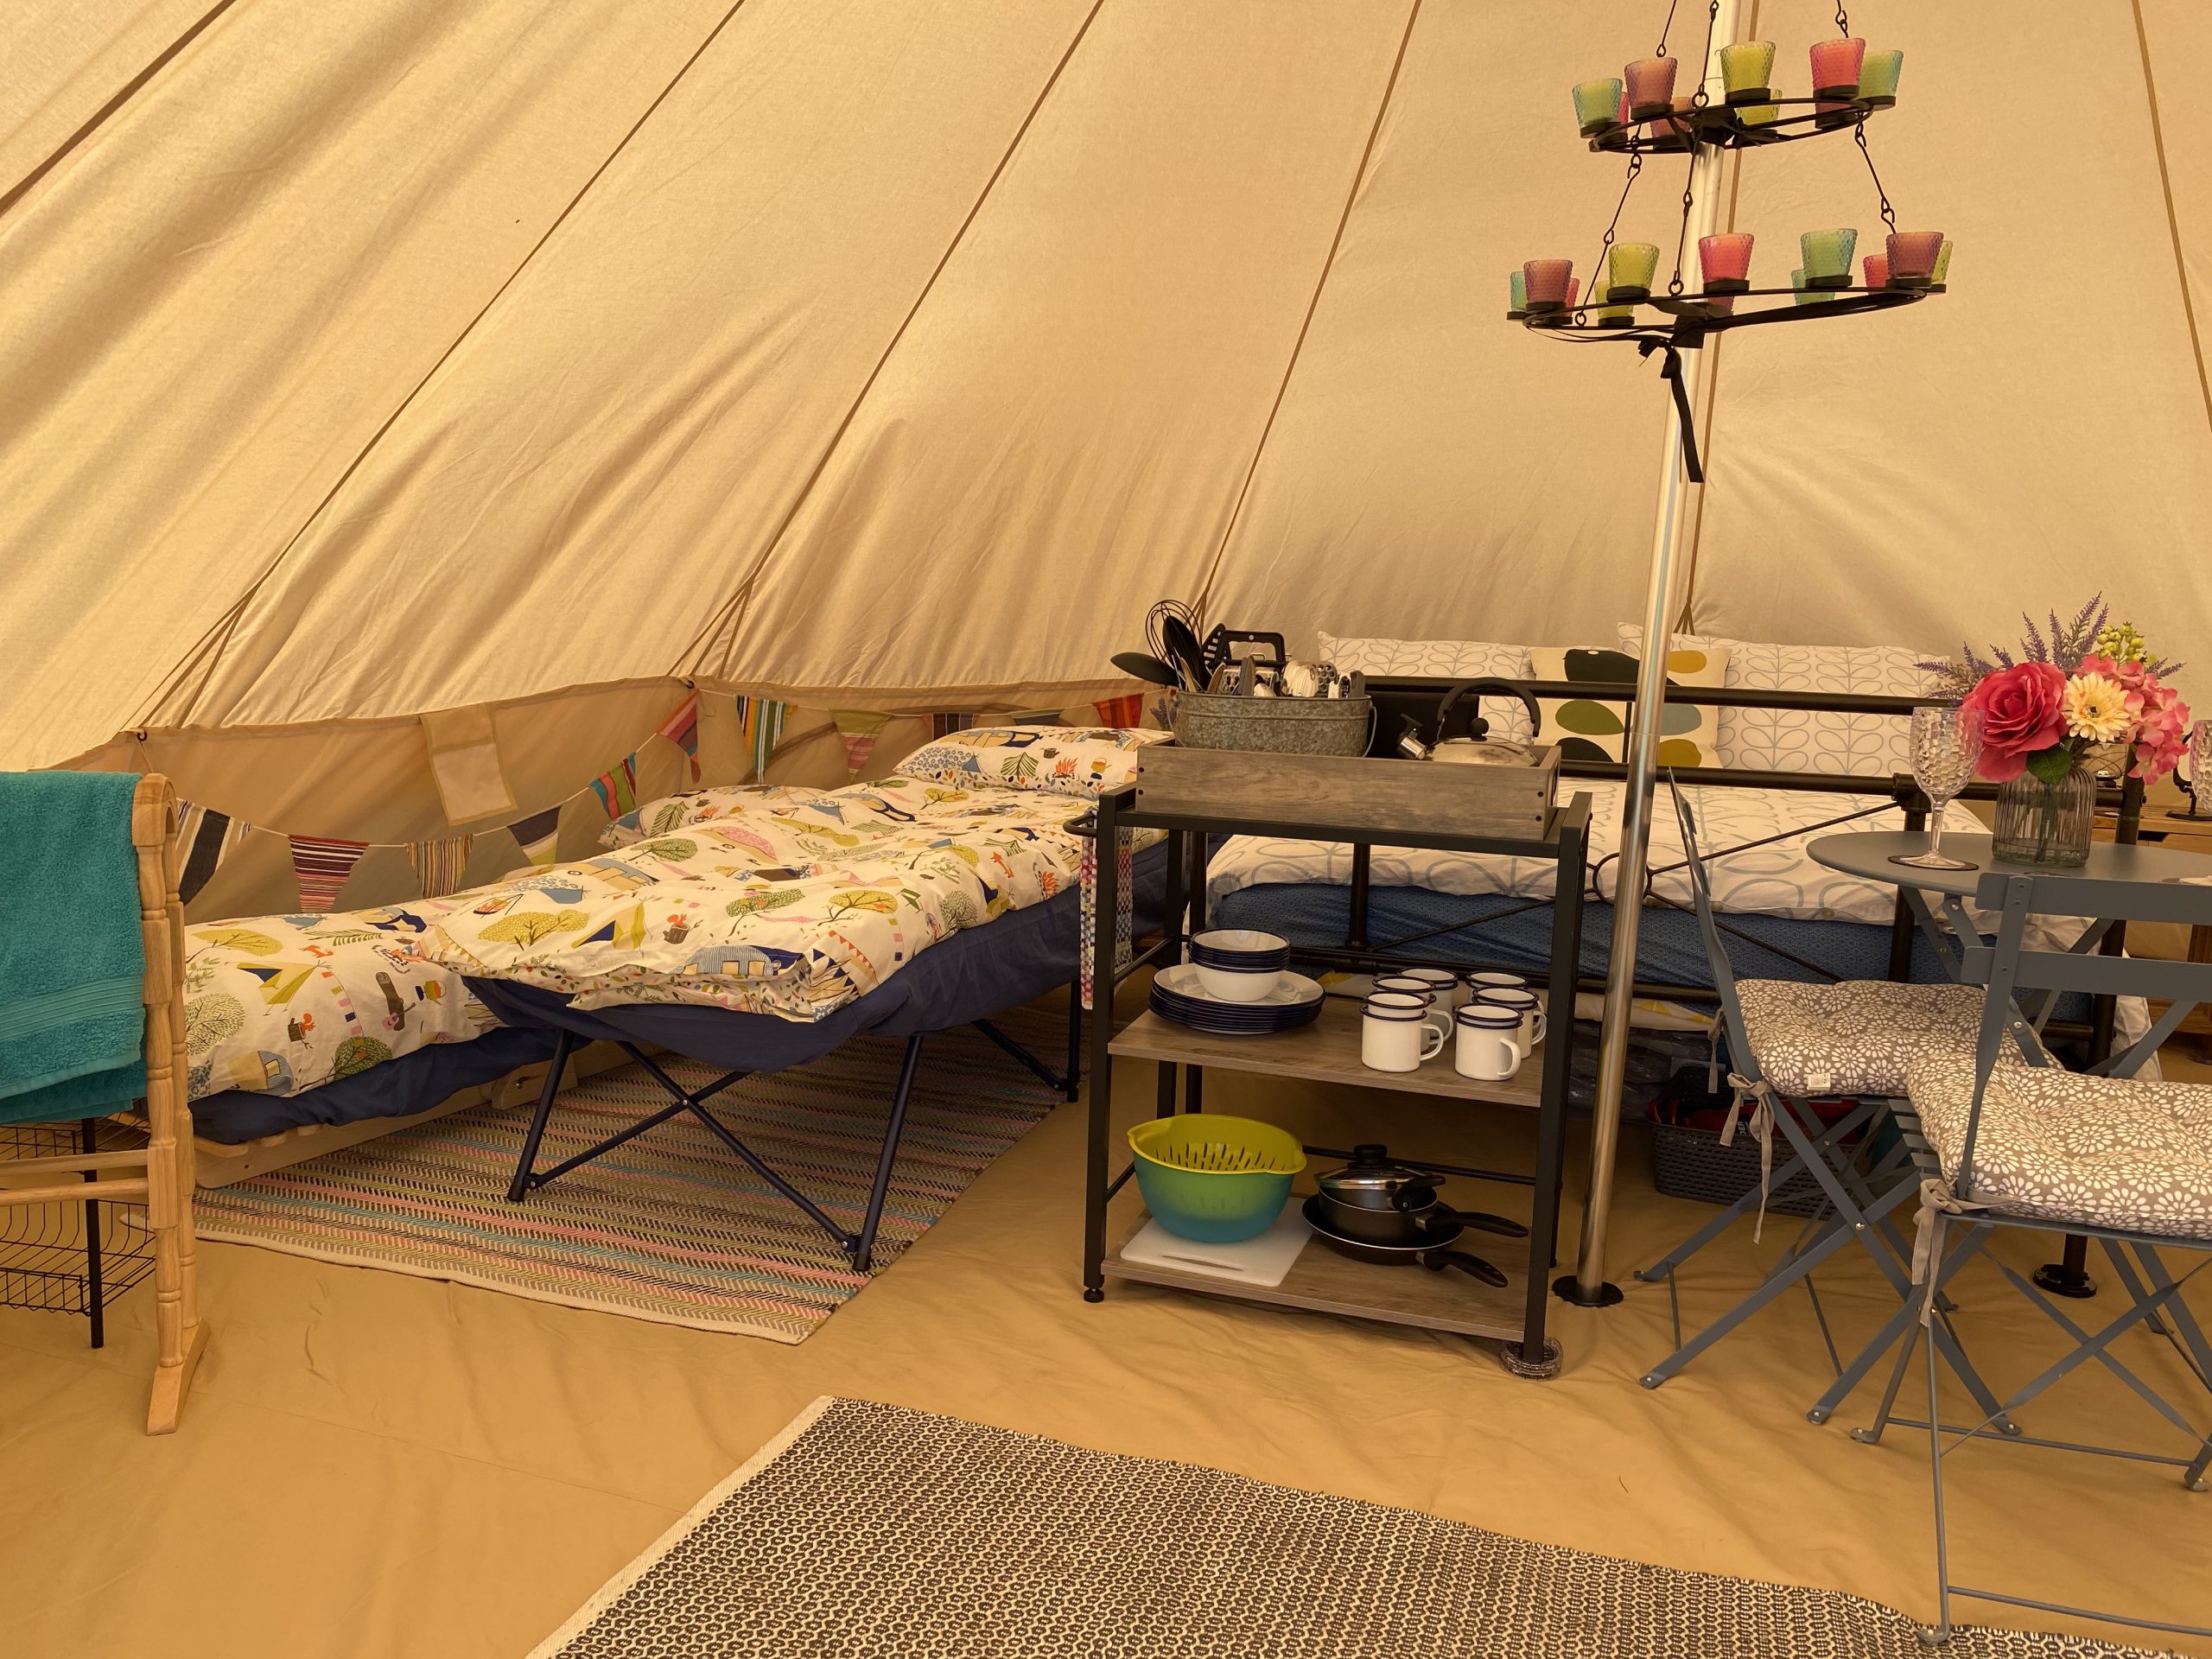 6m bell tent - set up for a group of 6 adults